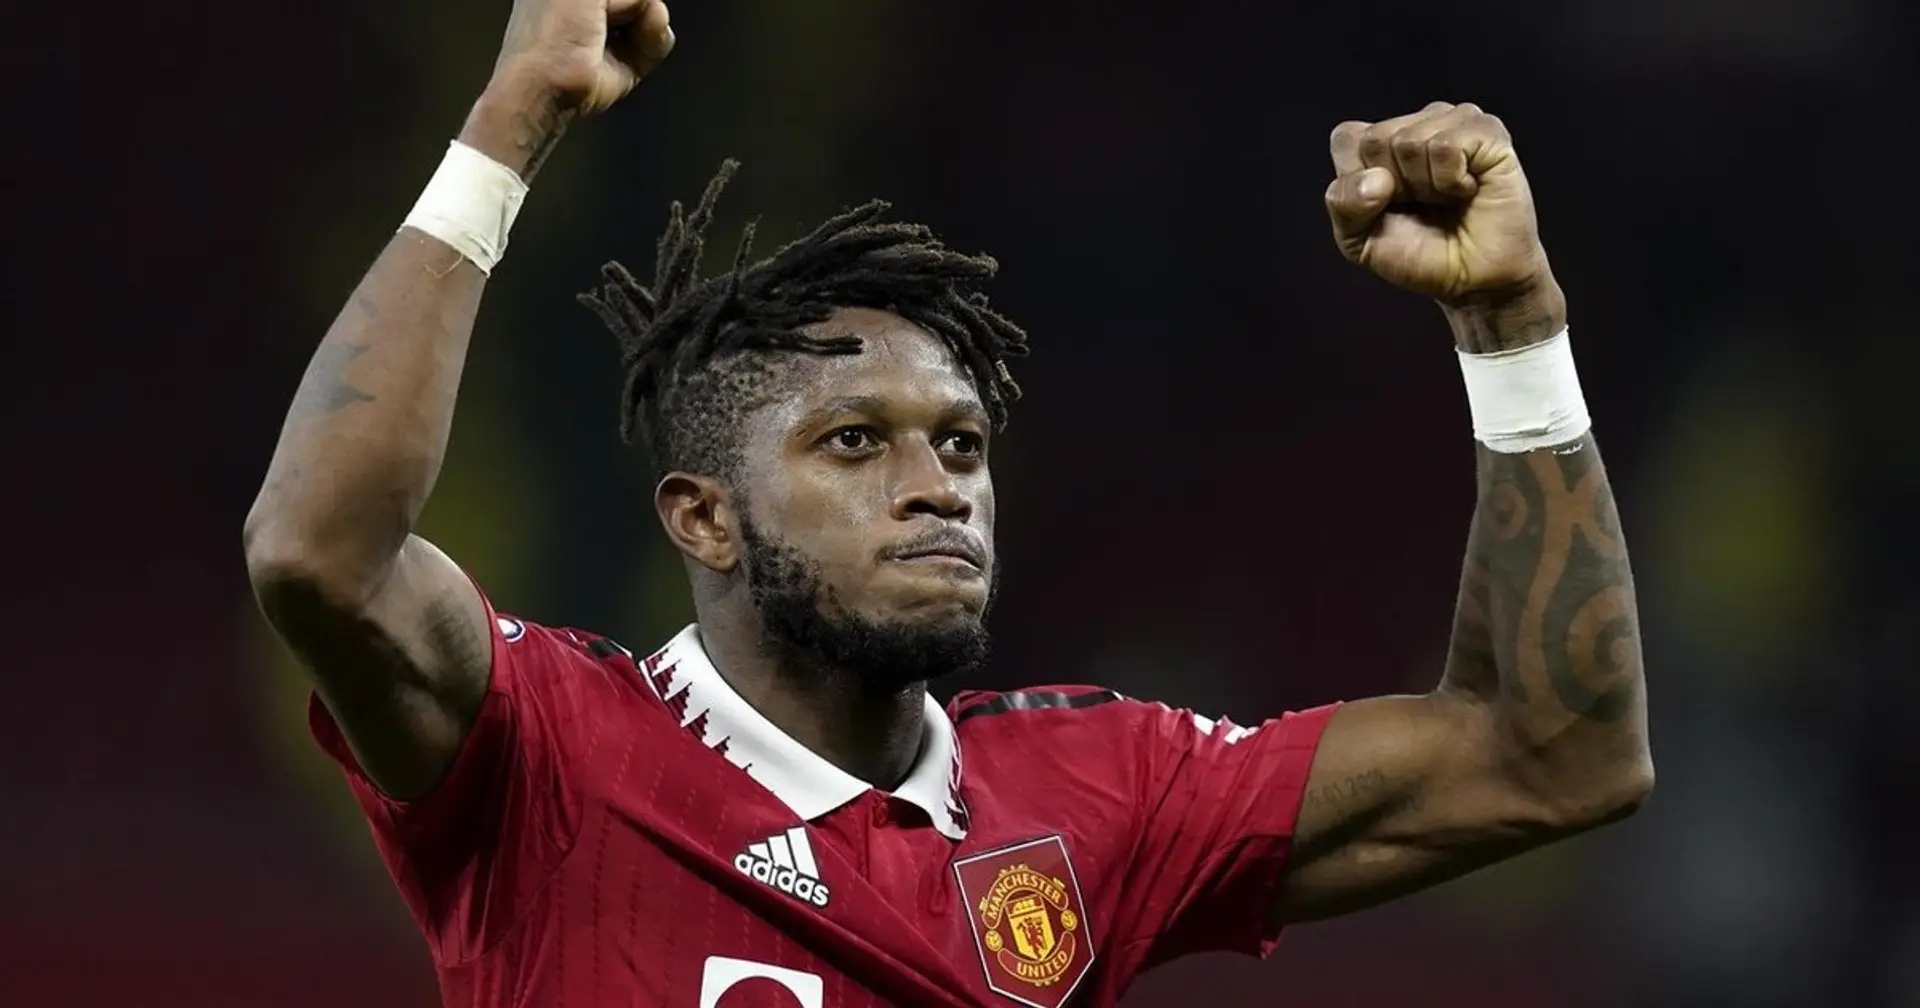 Man United confirm agreement with Fenerbahce for Fred's transfer